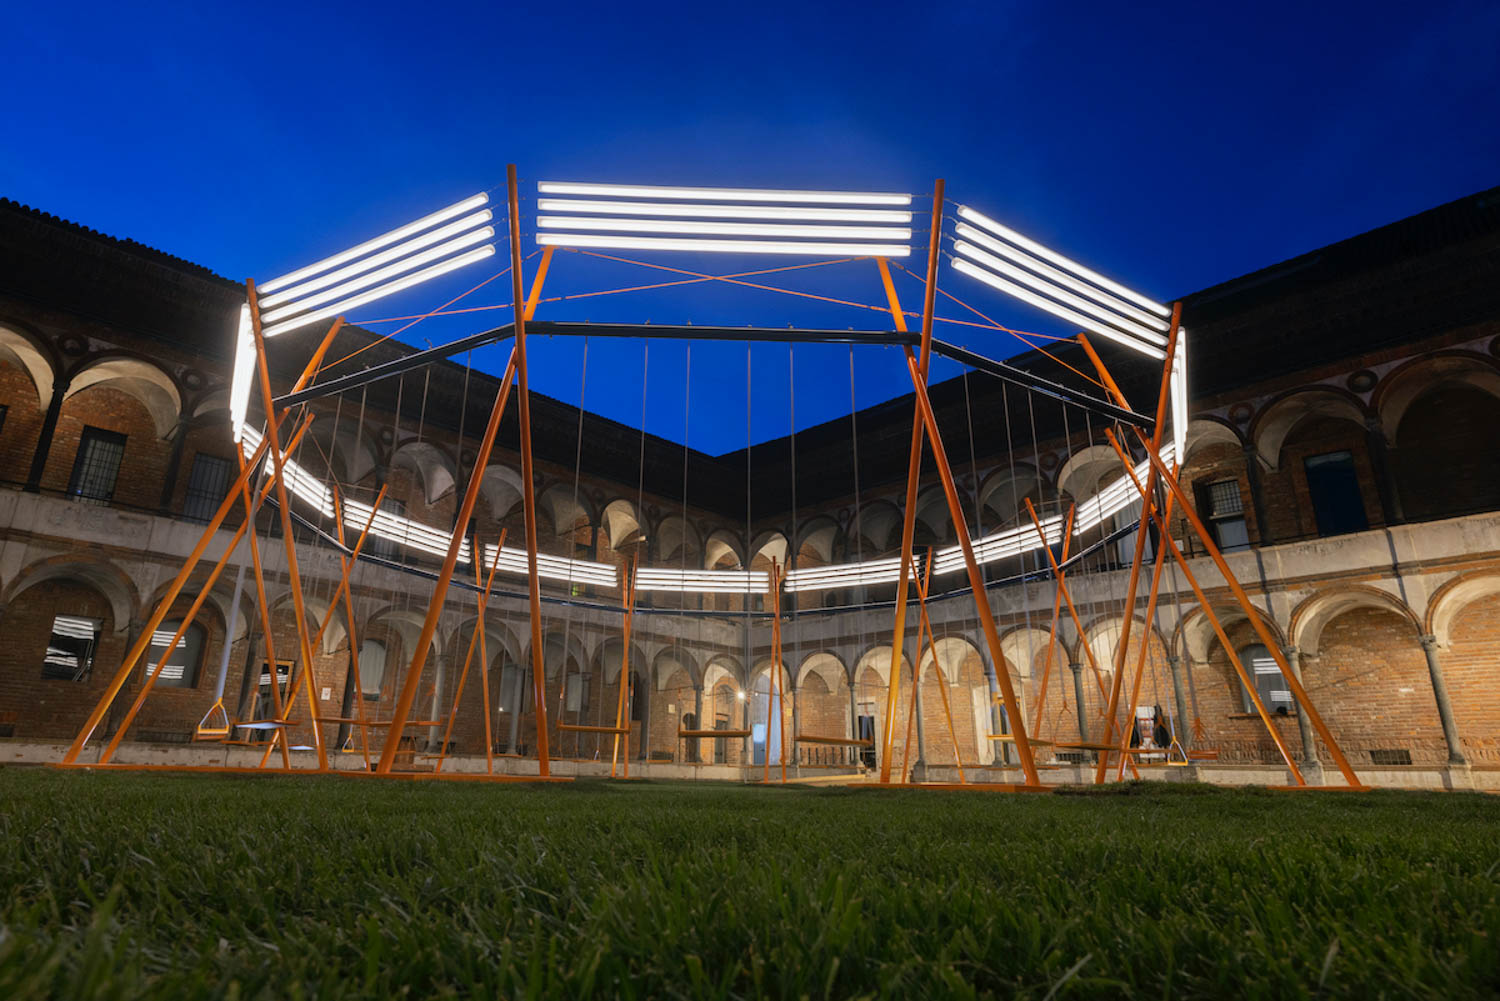 a supersized swing set is lit up at night at the University of Milan